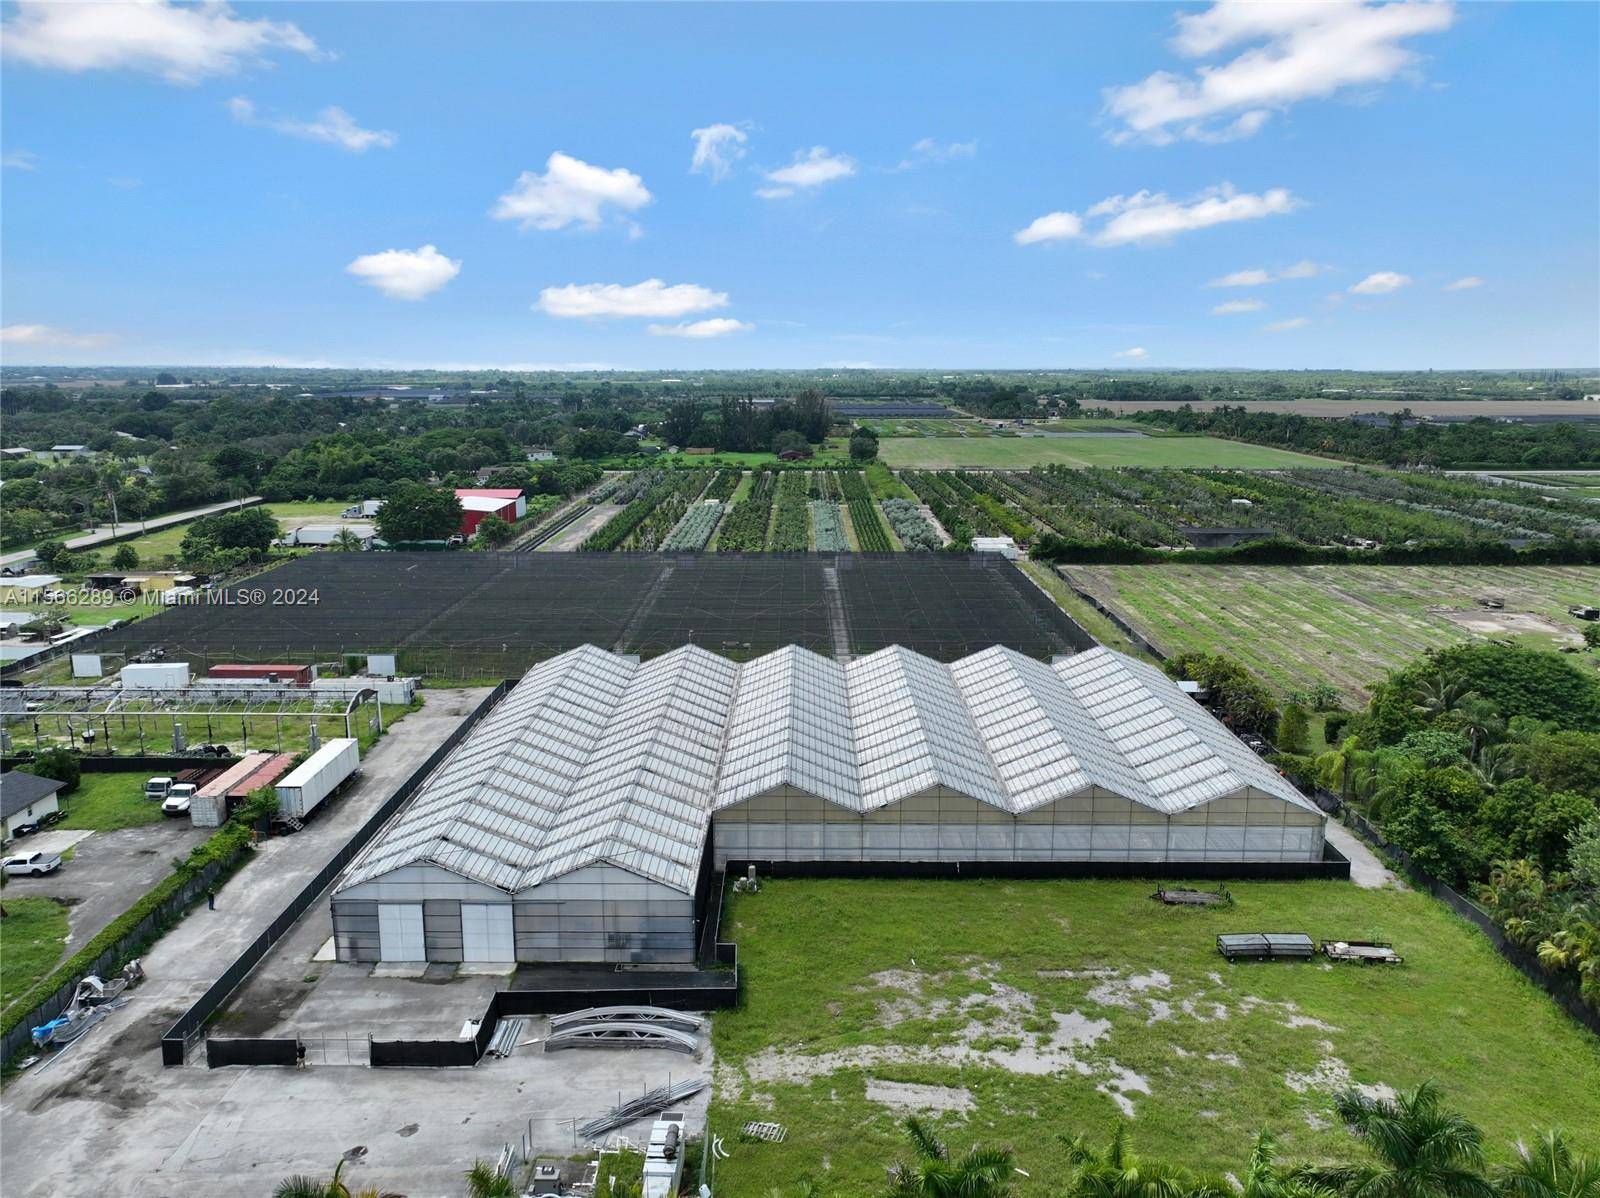 This 6. 10 acre nursery is a full service cannabis cultivation facility located in the fertile Redlands of Homestead, FL.